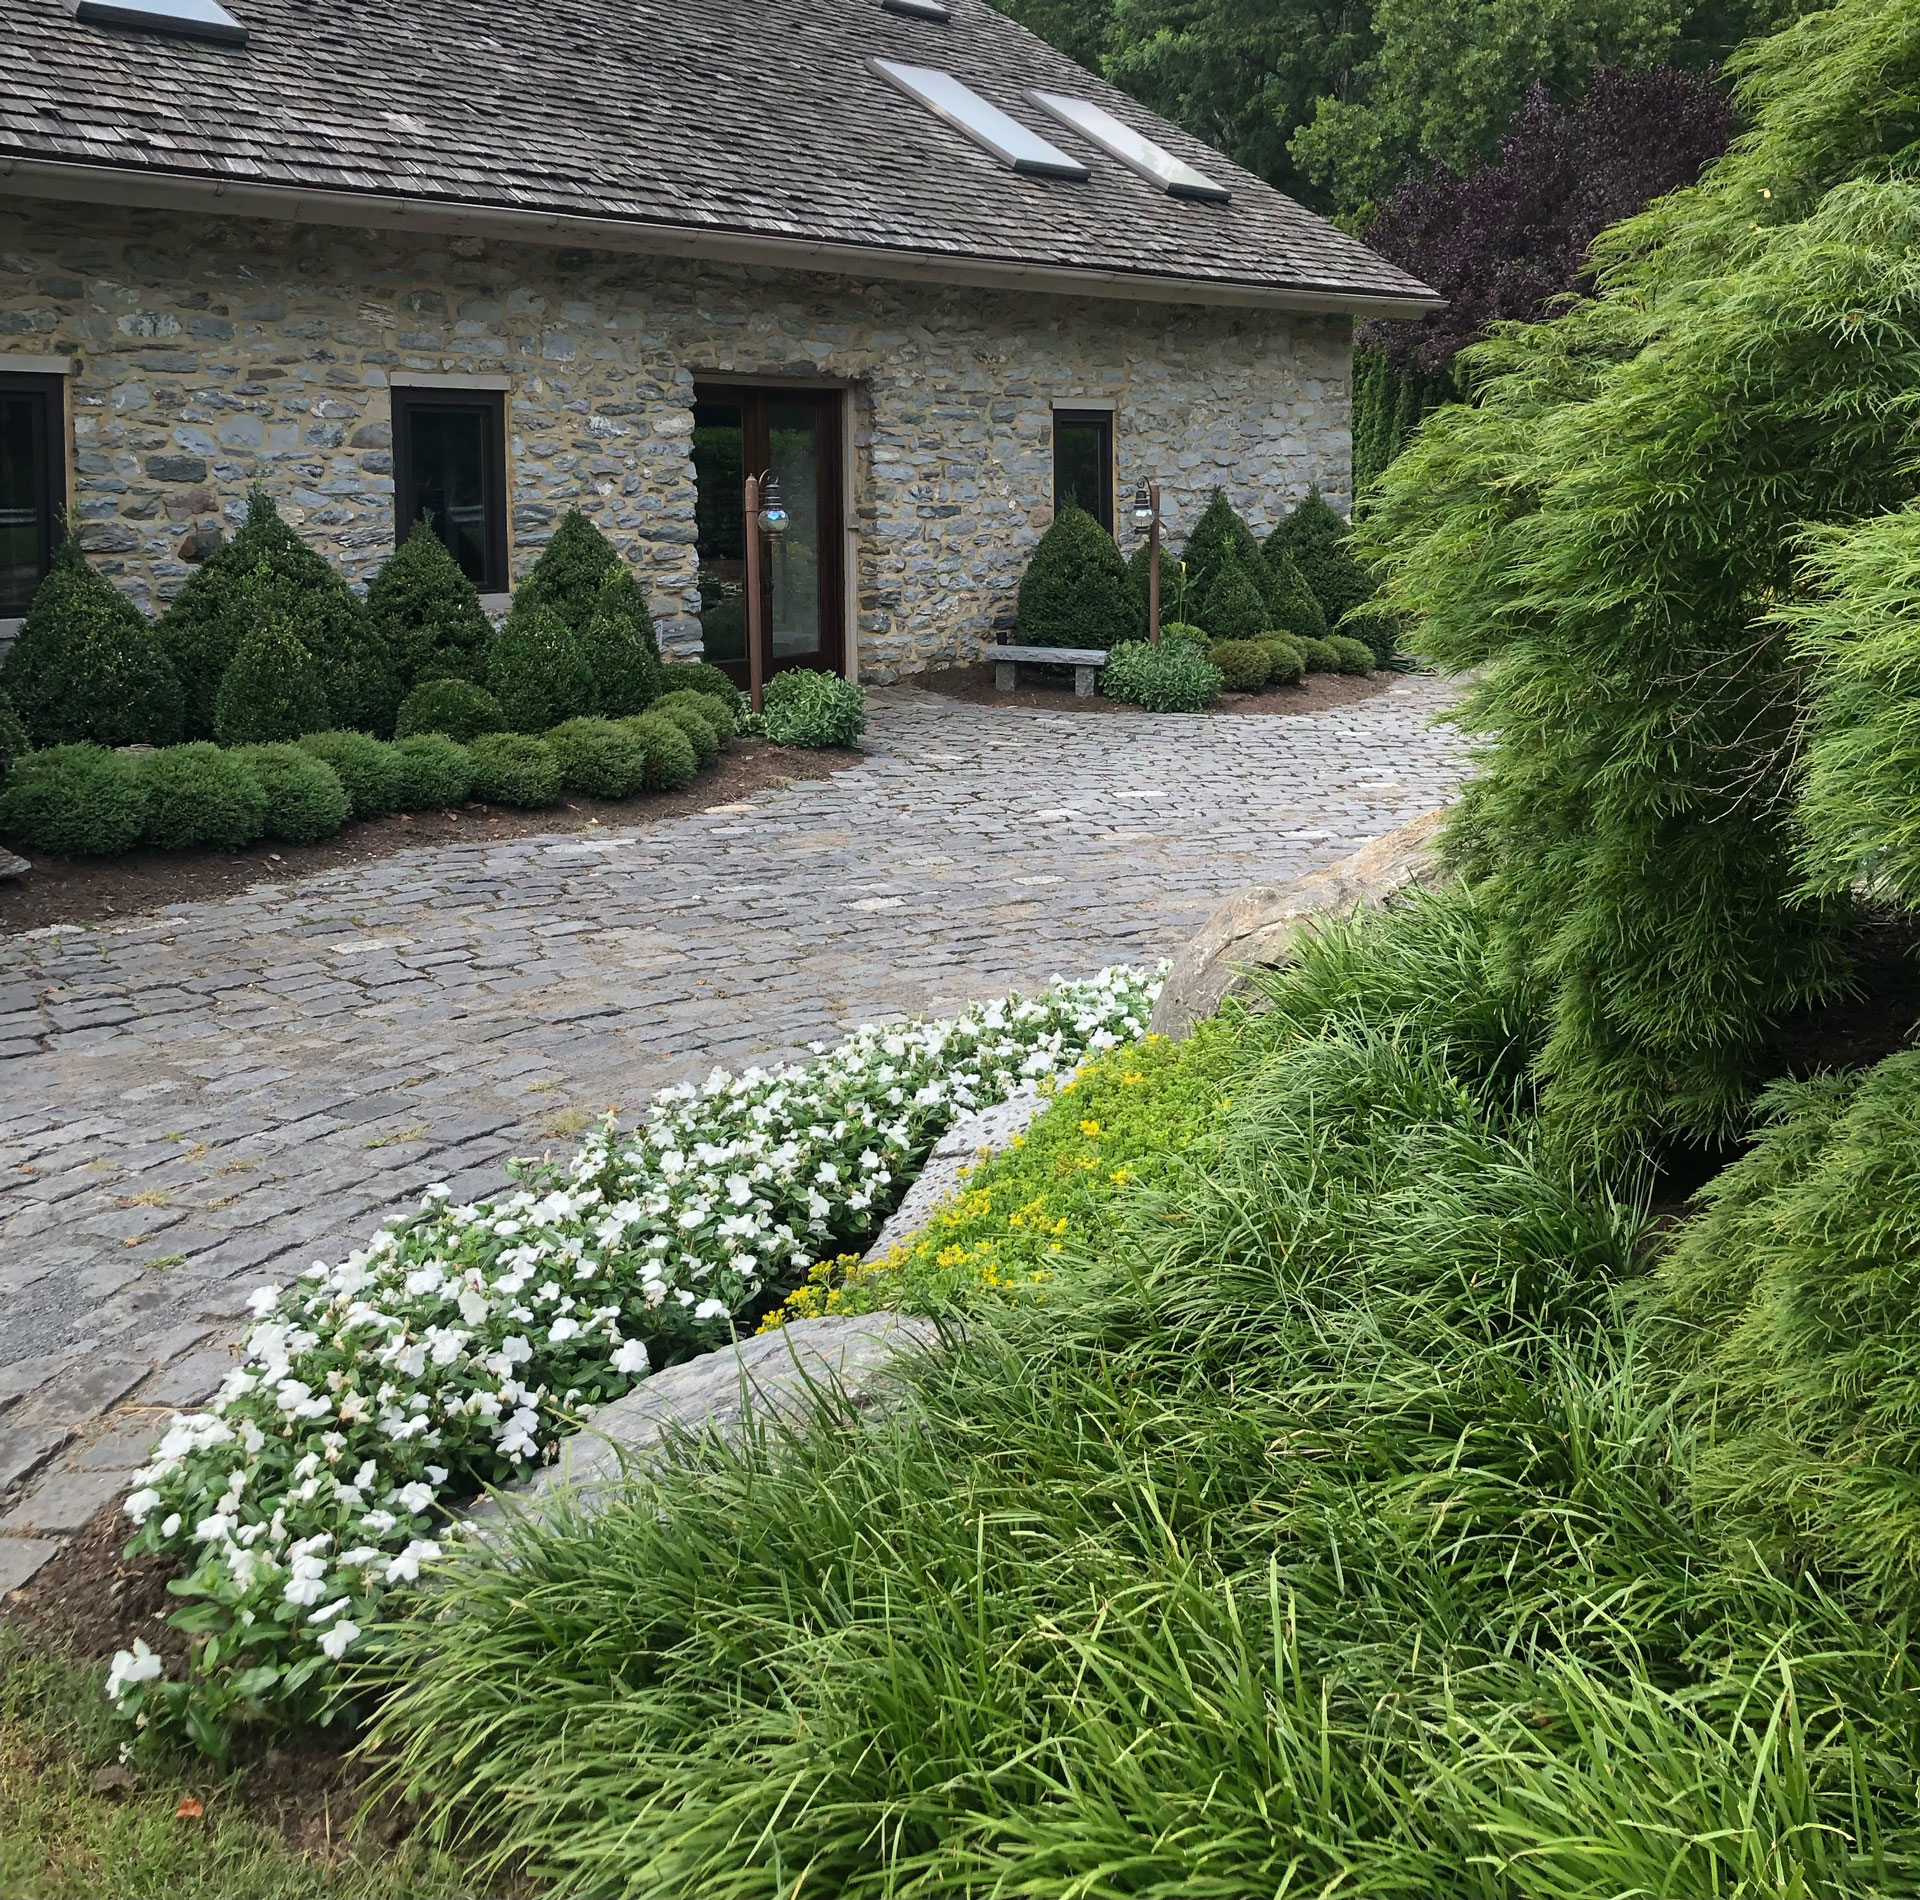 Landscaping around historic building with stone driveway surrounded by greenery and white flowers.